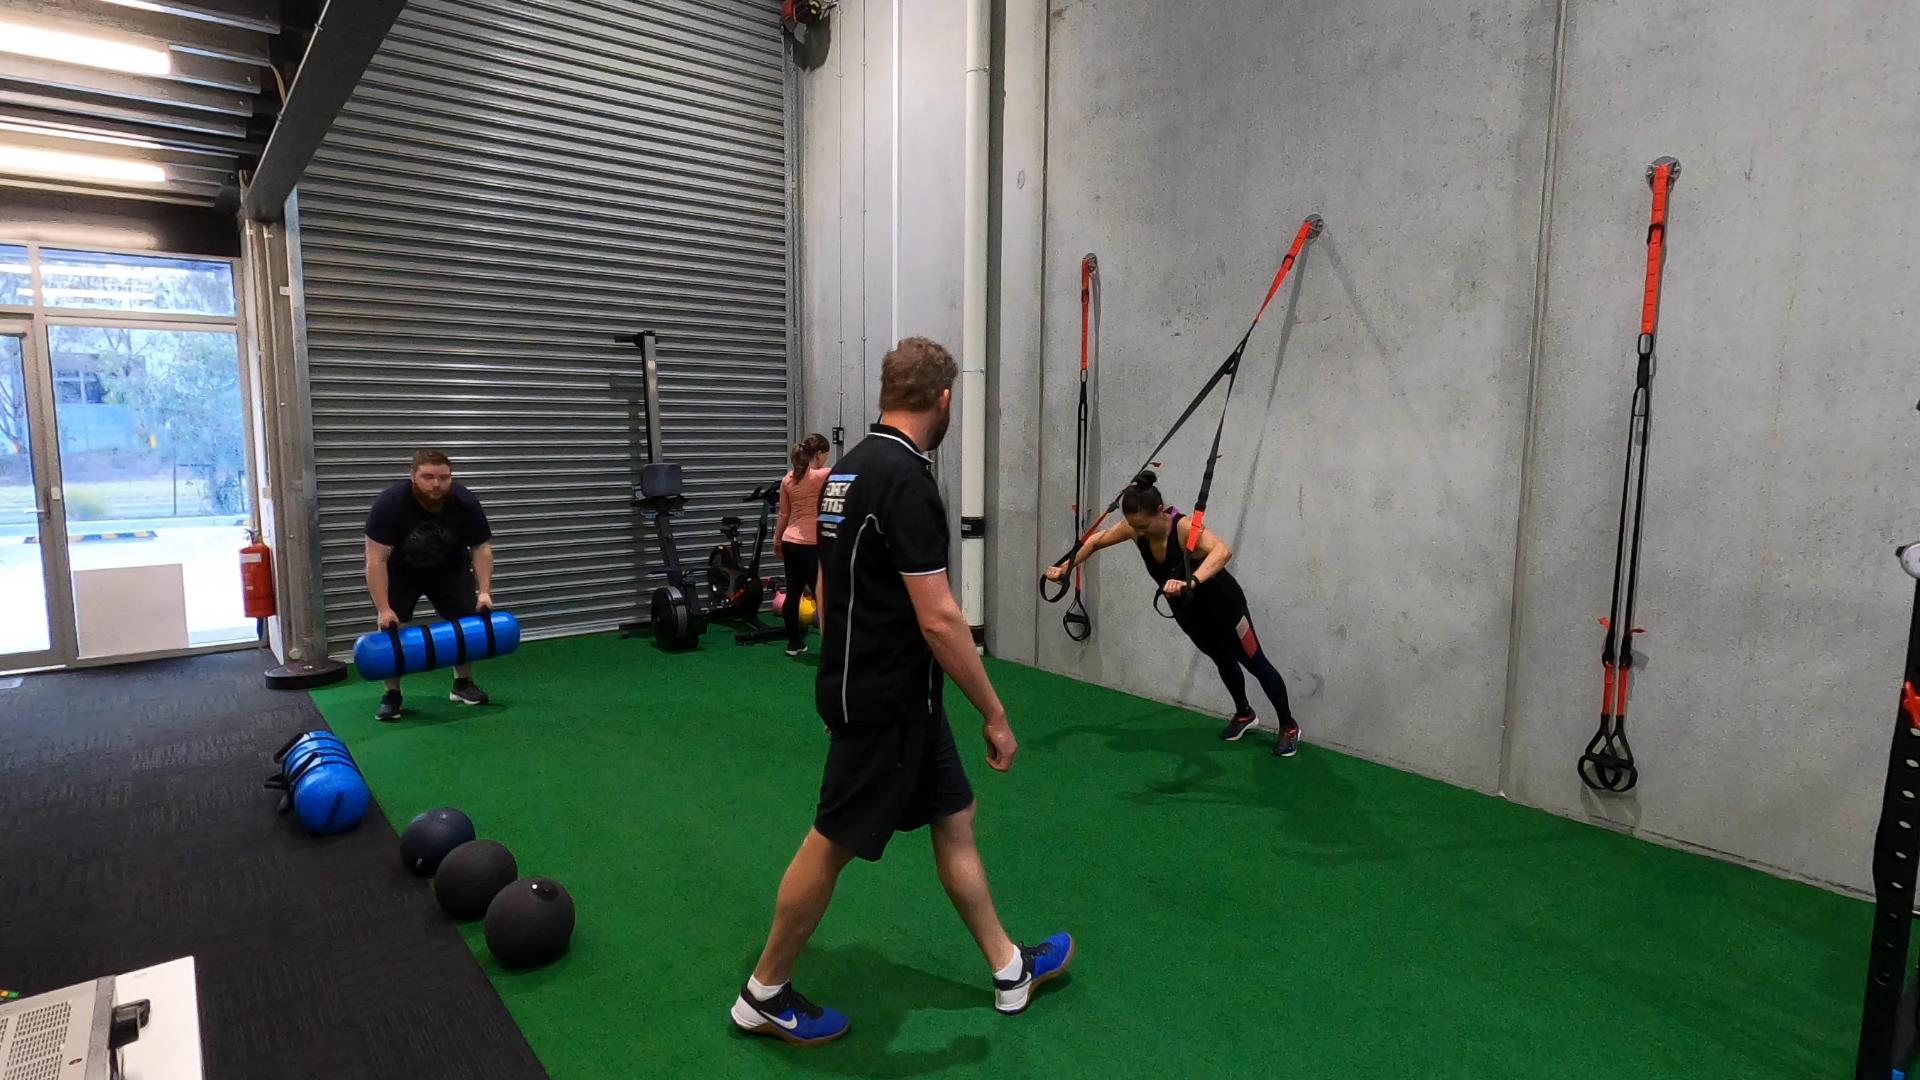 Fortify Fitness showcasing their group fitness classes in their Altona based studio